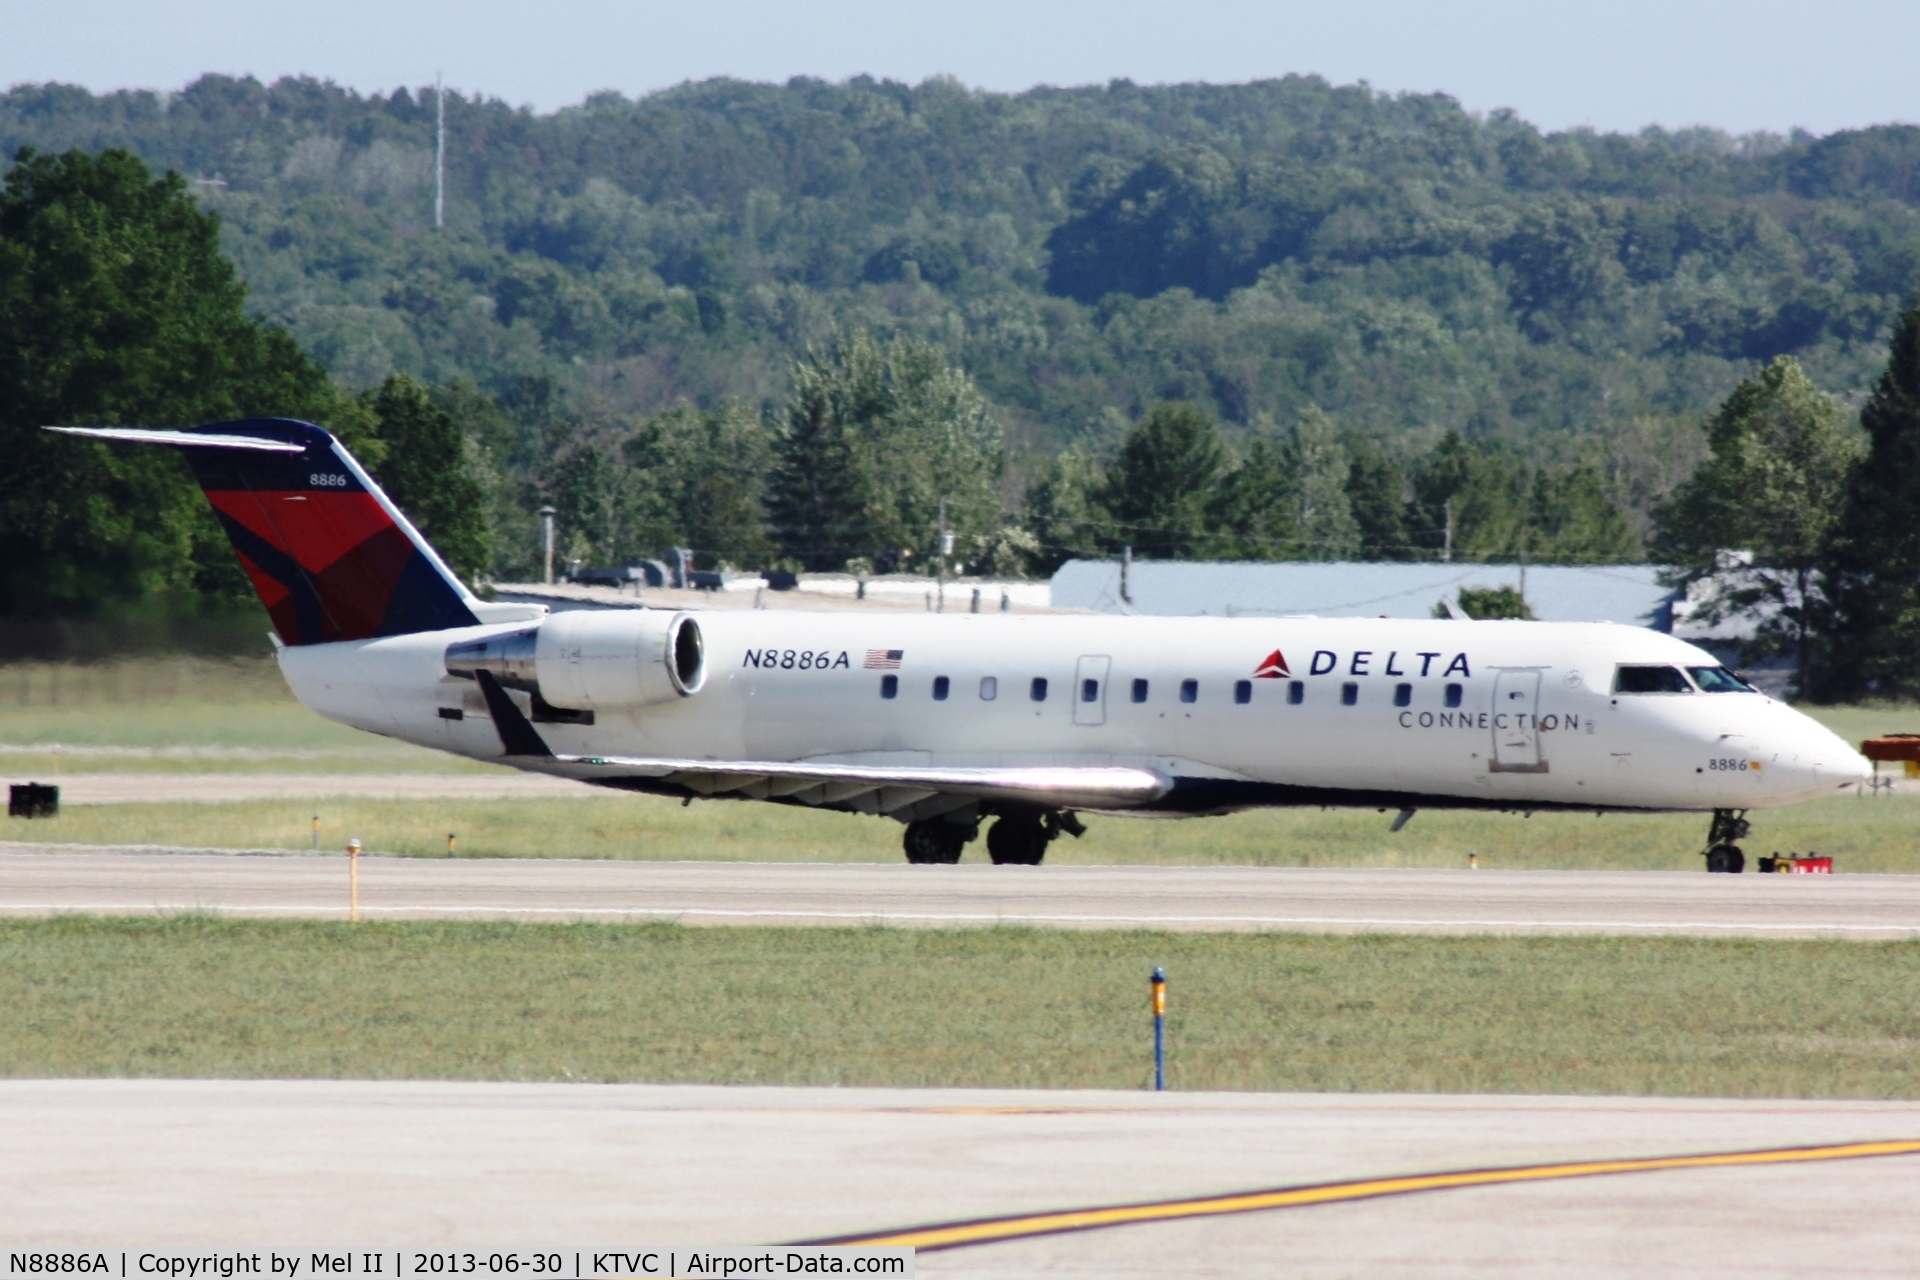 N8886A, 2003 Bombardier CRJ-200 (CL-600-2B19) C/N 7886, FLG3696 - KTVC-KDTW - Taxi For Departure RWY 10